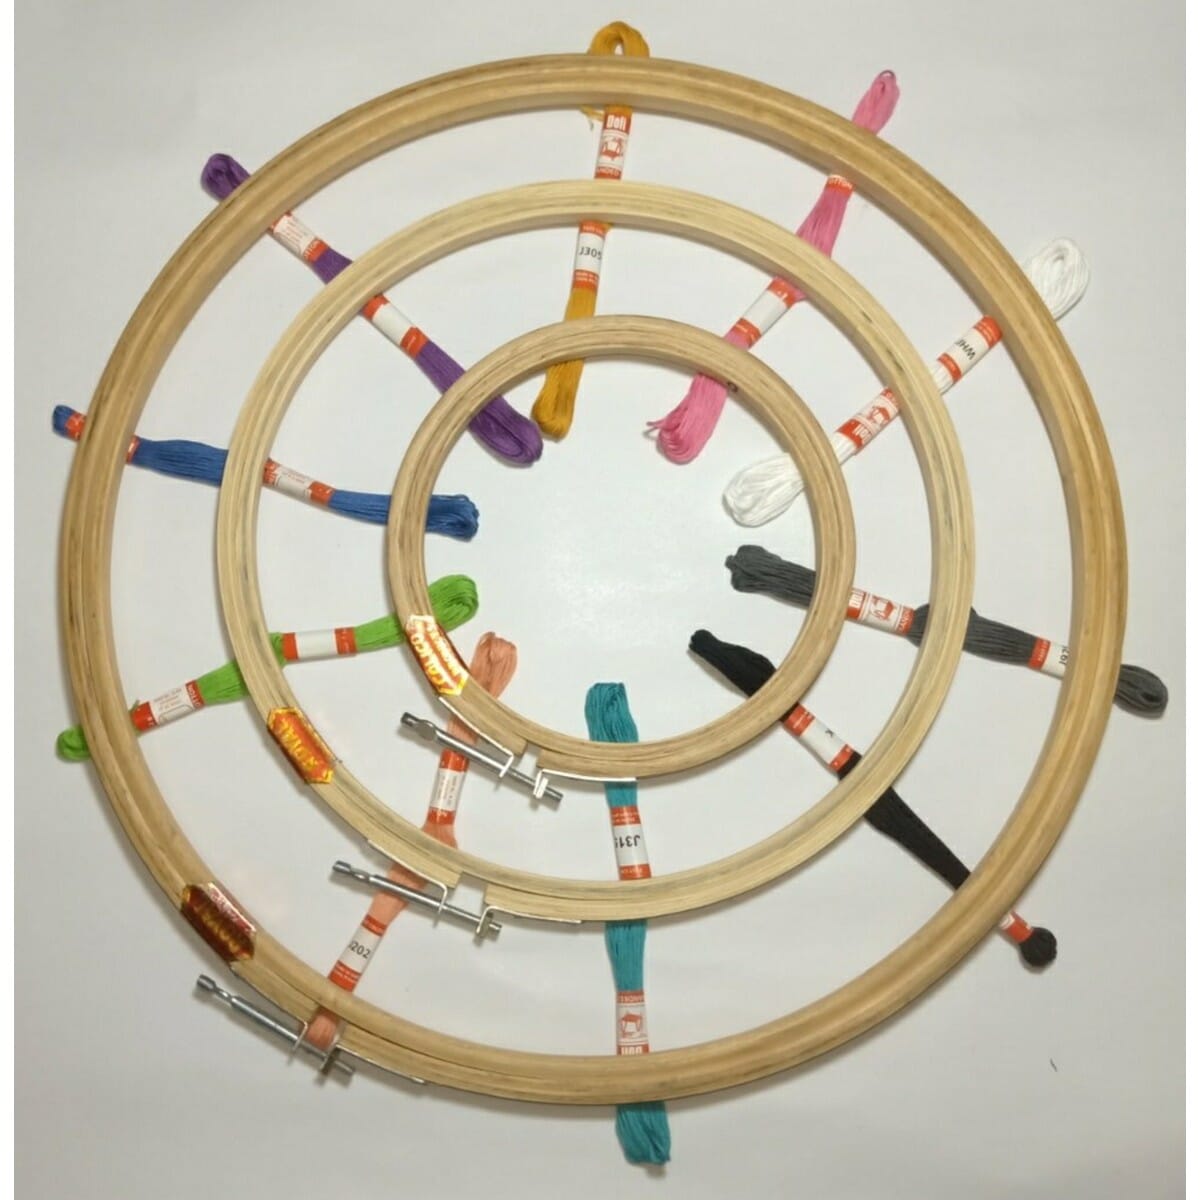 Wooden Embroidery Hoop Ring Frame Adjustable Handy Sewing Circle for Needle  Art & Design - Wooden Hoop Ring For Sewing Purpose